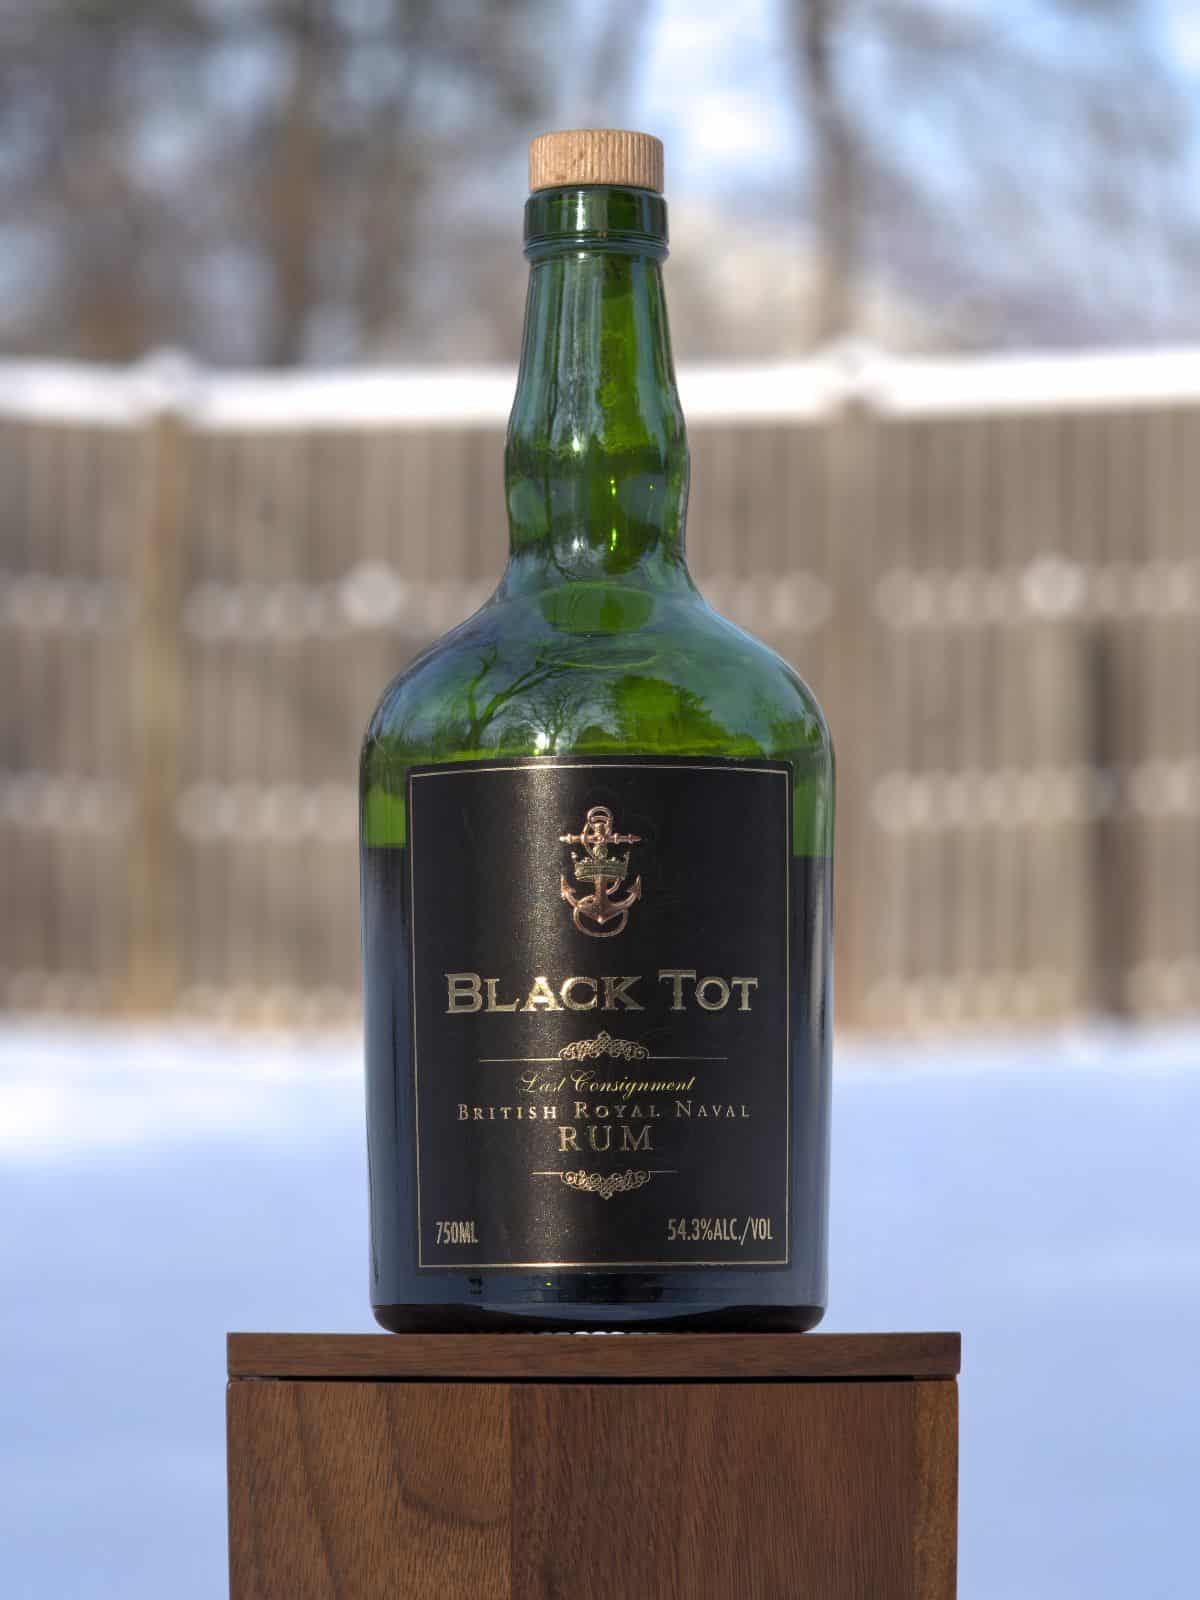 Black Tot Last Consignment featured